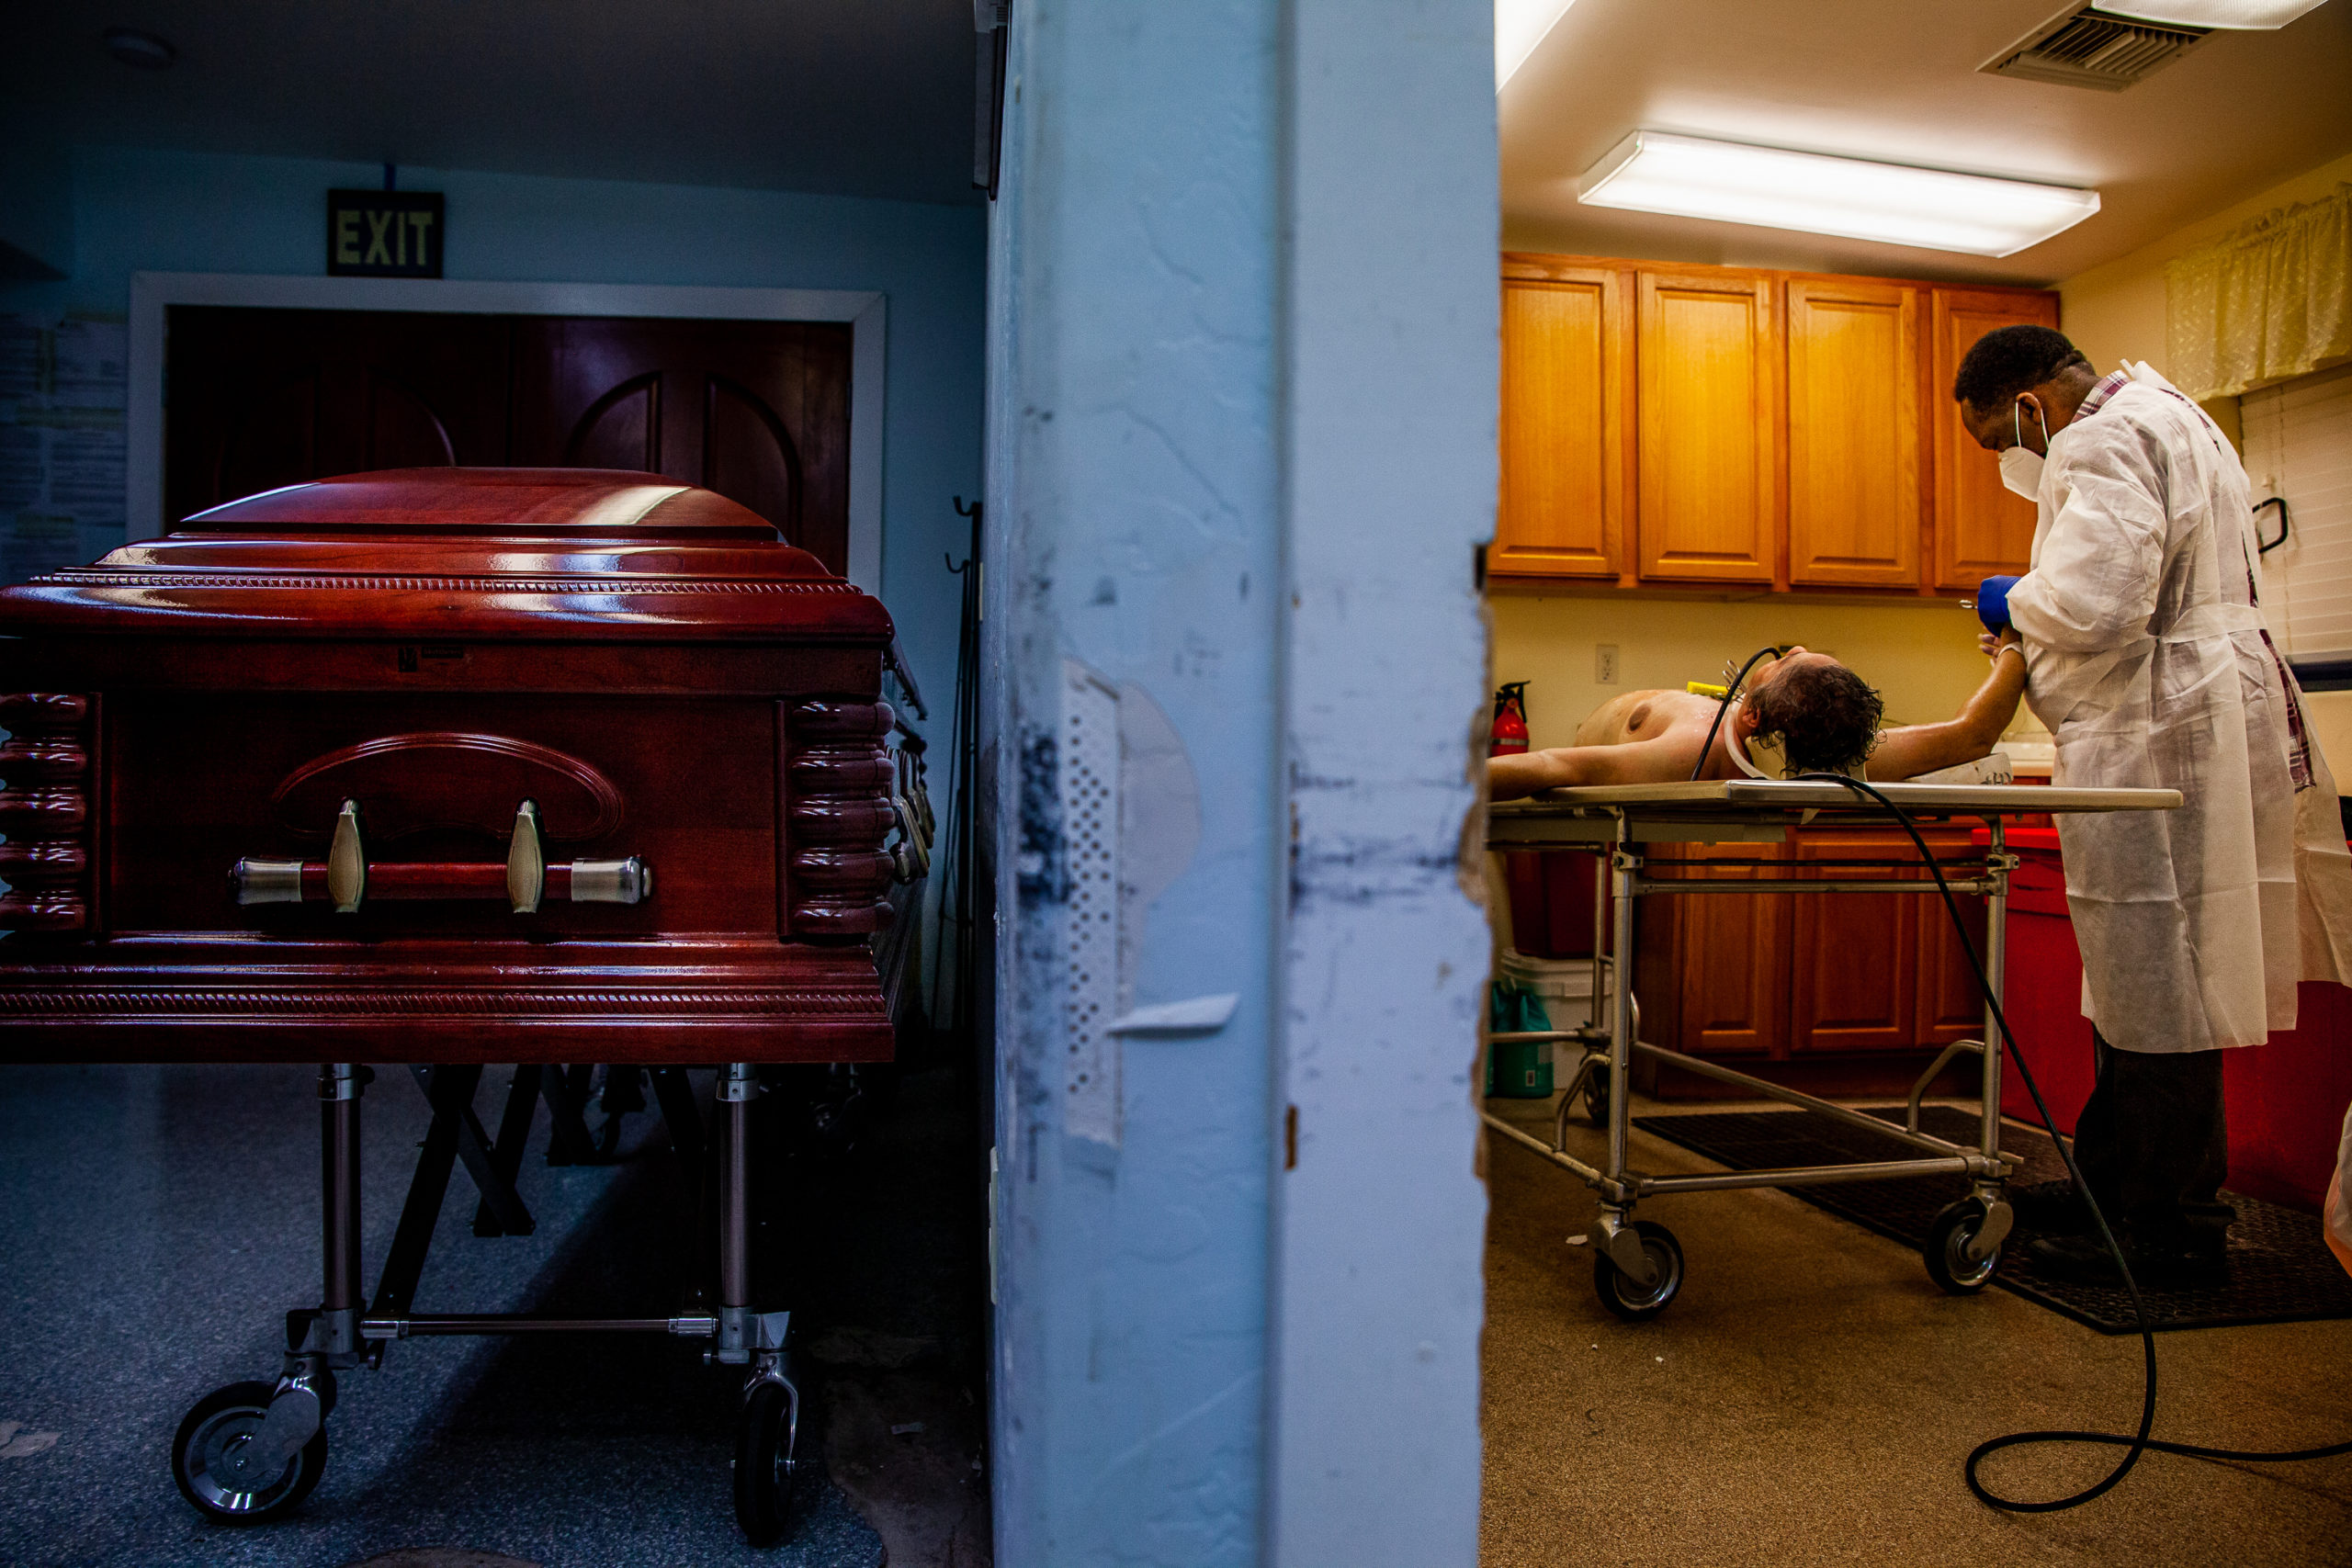 Ron Thornson embalms a body at a funeral home in Mesa, Ariz., on March 18, 2021. Thornson helped relieve pressure on other funeral workers in the Phoenix area by performing embalmings at mortuaries with surging workloads. Although some funeral workers ref